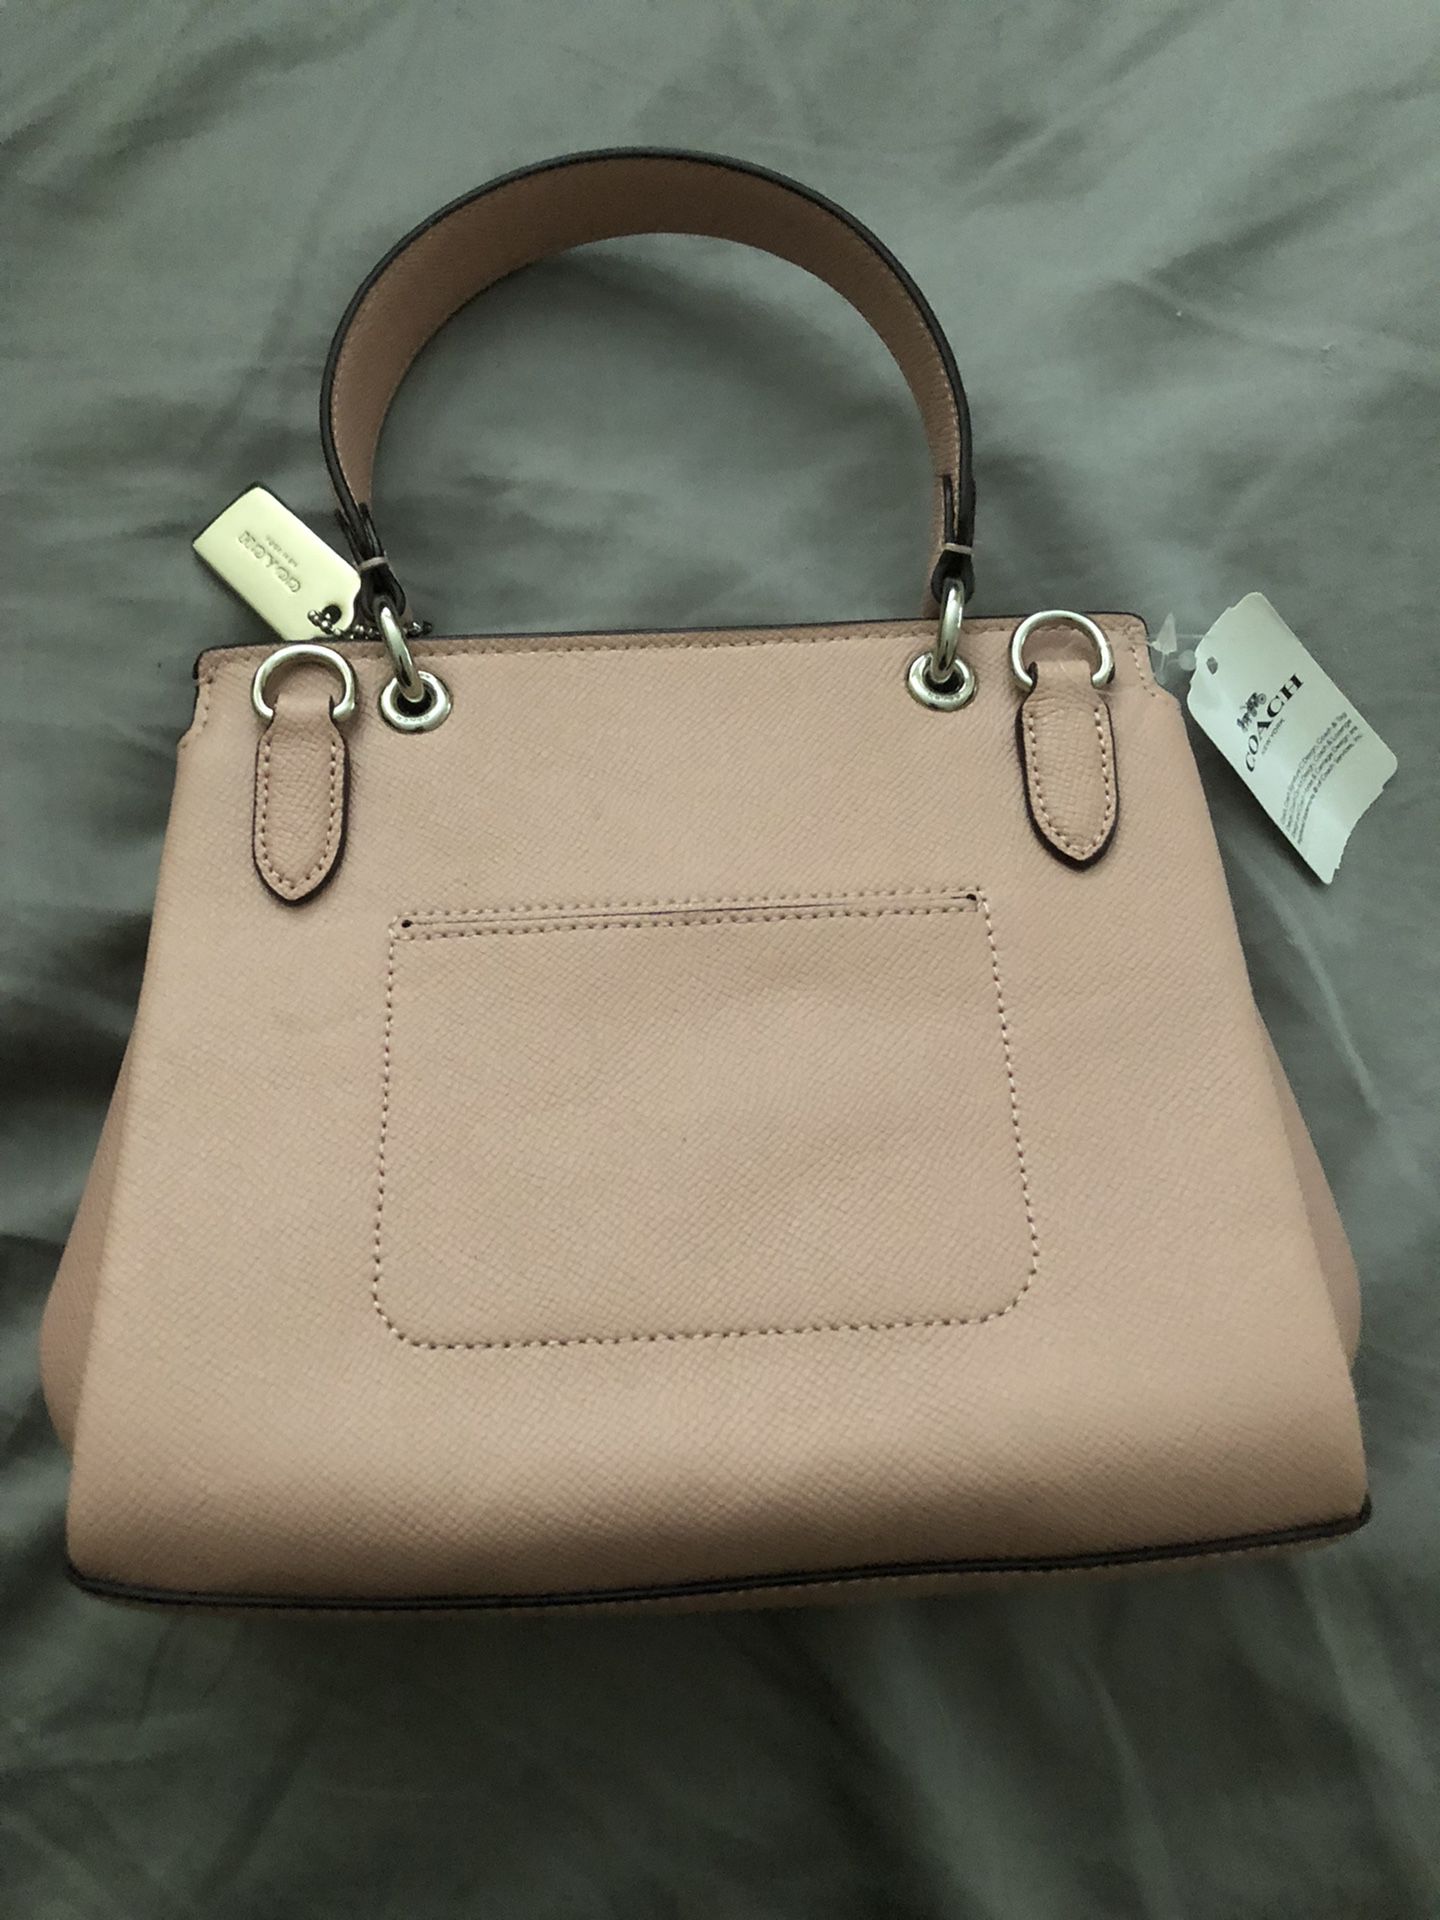 Brand New Pink Coach Crossbody Purse for Sale in Chino, CA